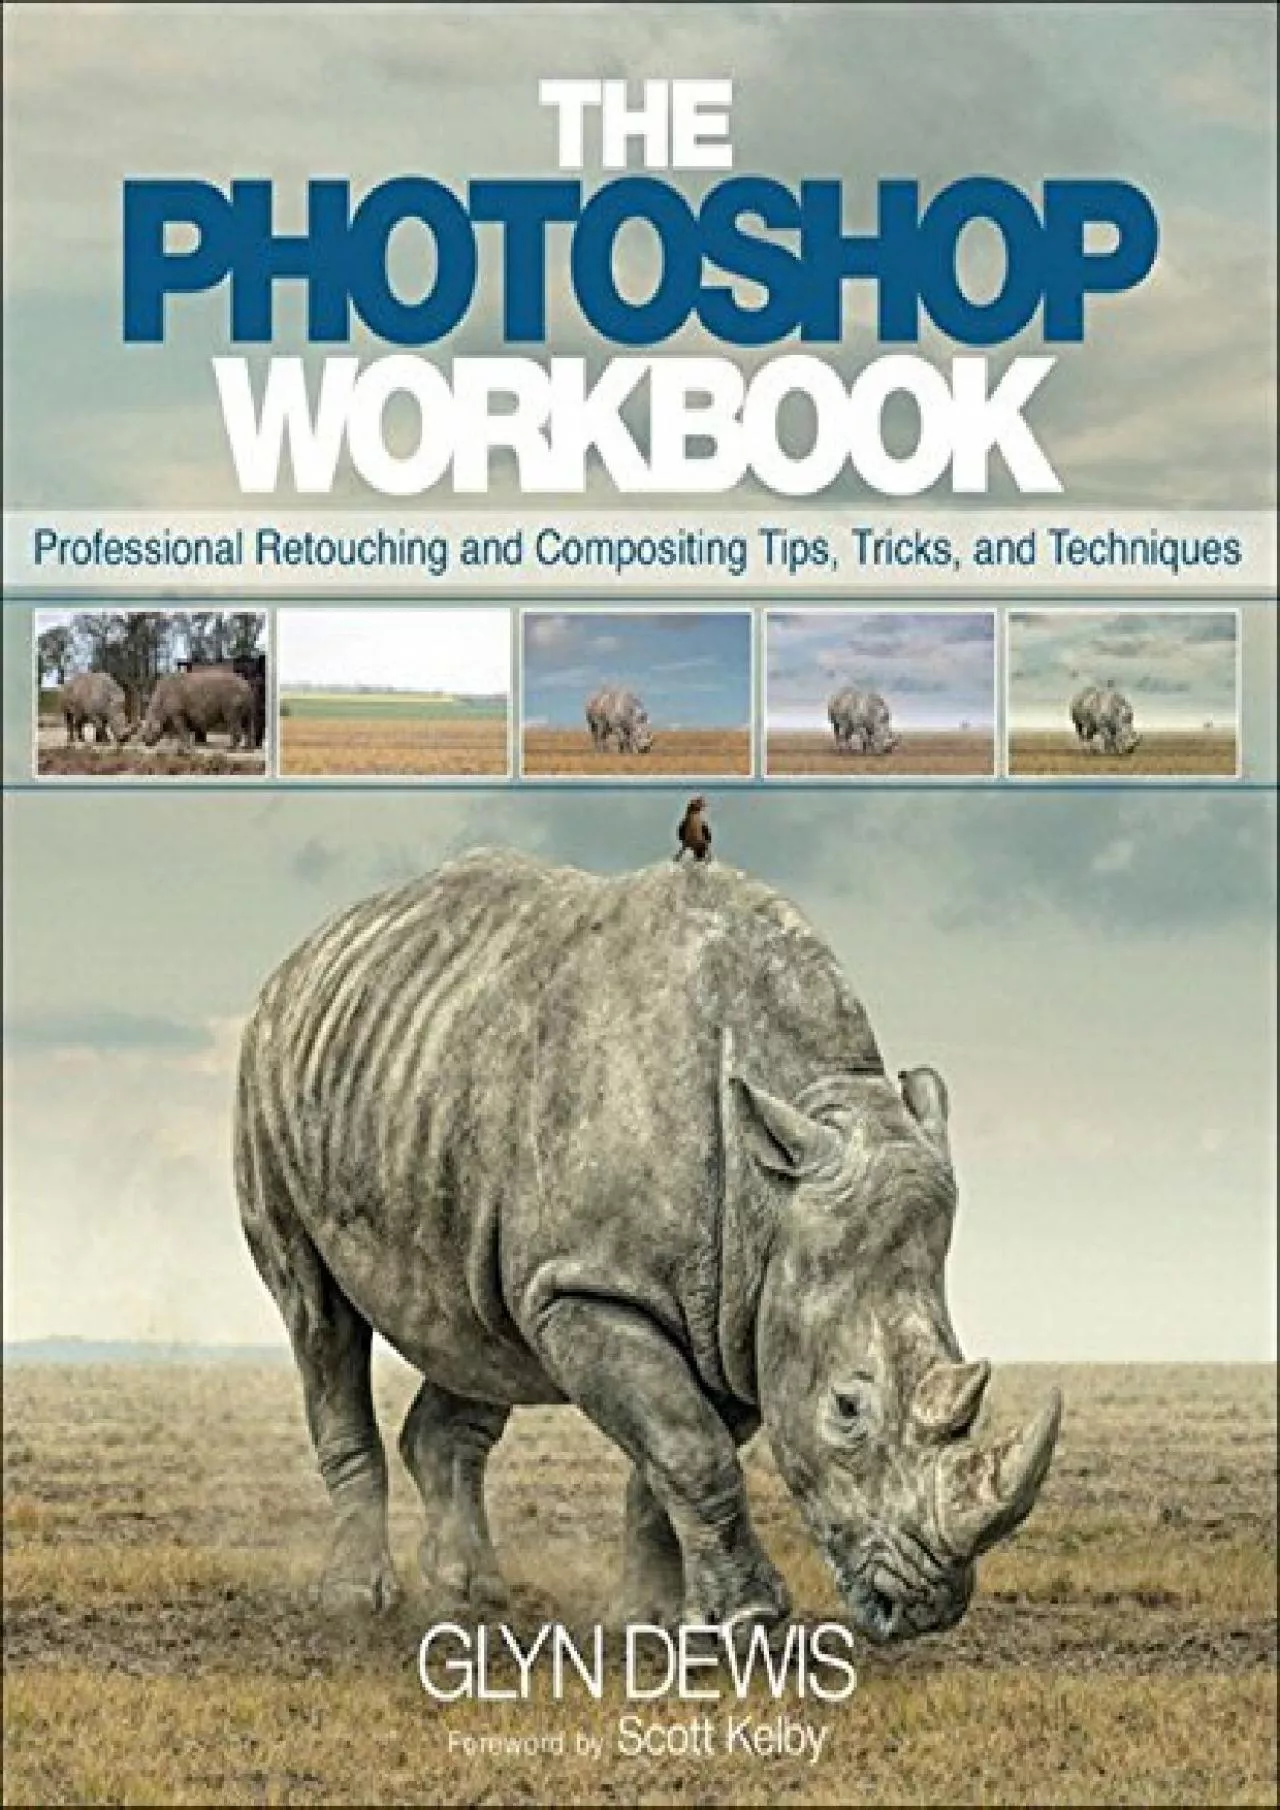 (DOWNLOAD)-Photoshop Workbook, The: Professional Retouching and Compositing Tips, Tricks,